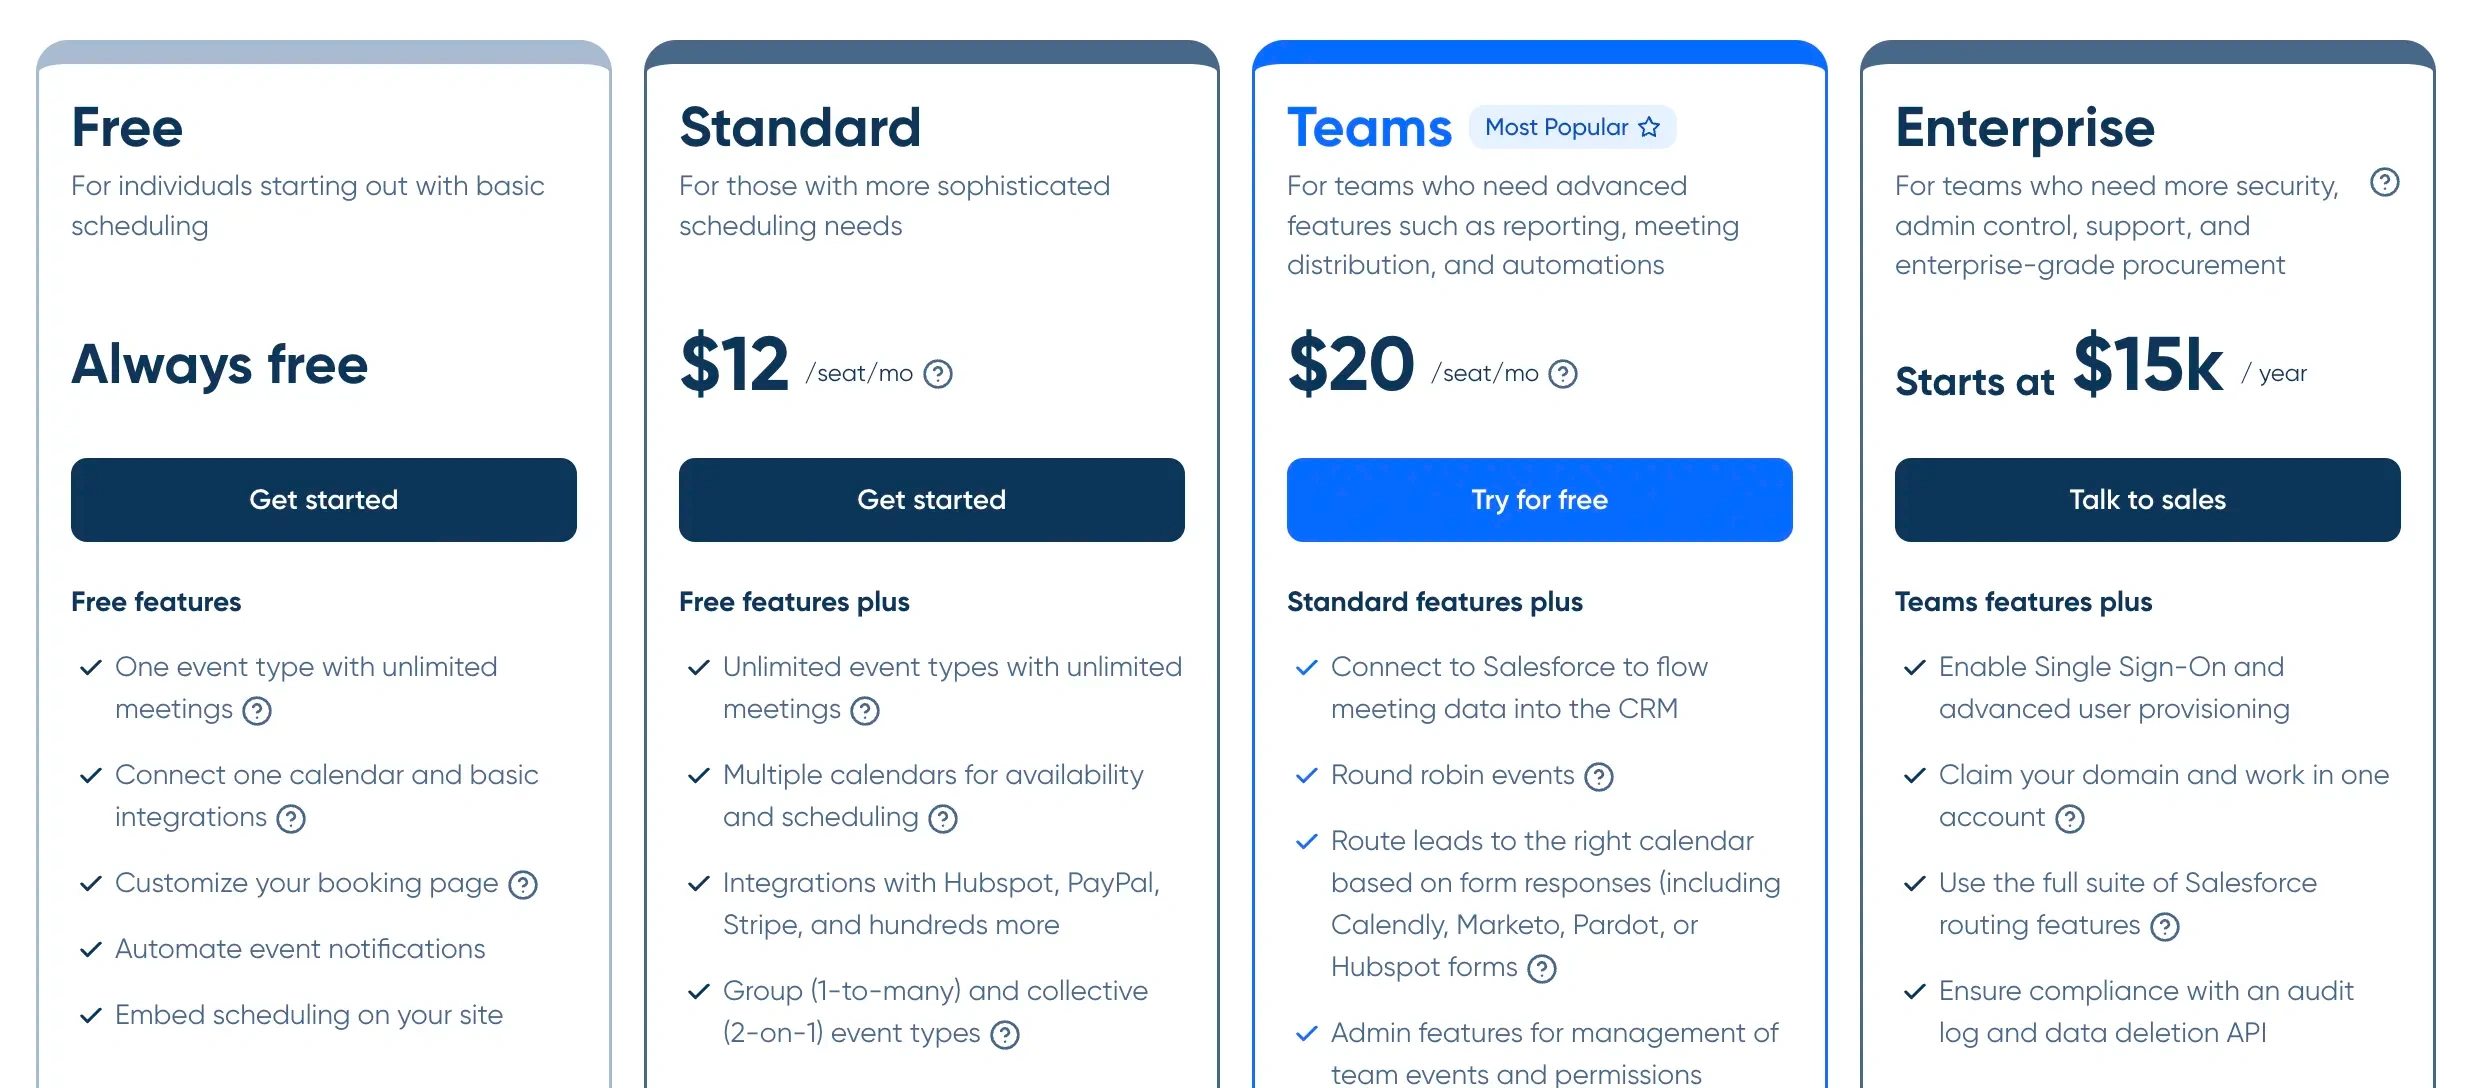 The Calendly Pricing page